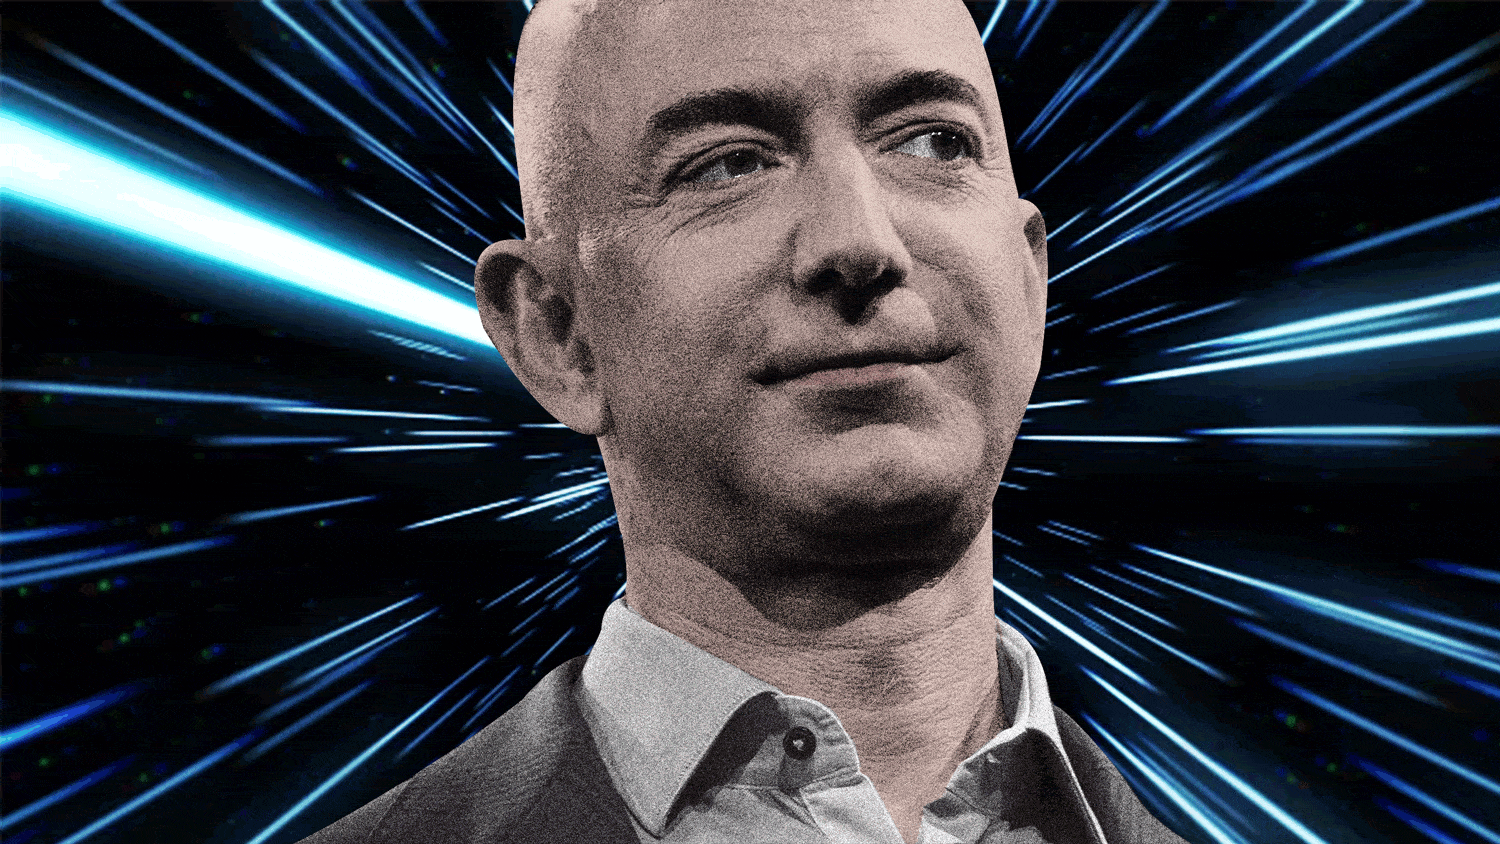 gif of amazon dot com ceo jeff bezos looking into distance in black and white with blue and white electric sparks behind him blue origin colonize moon lunar lander space